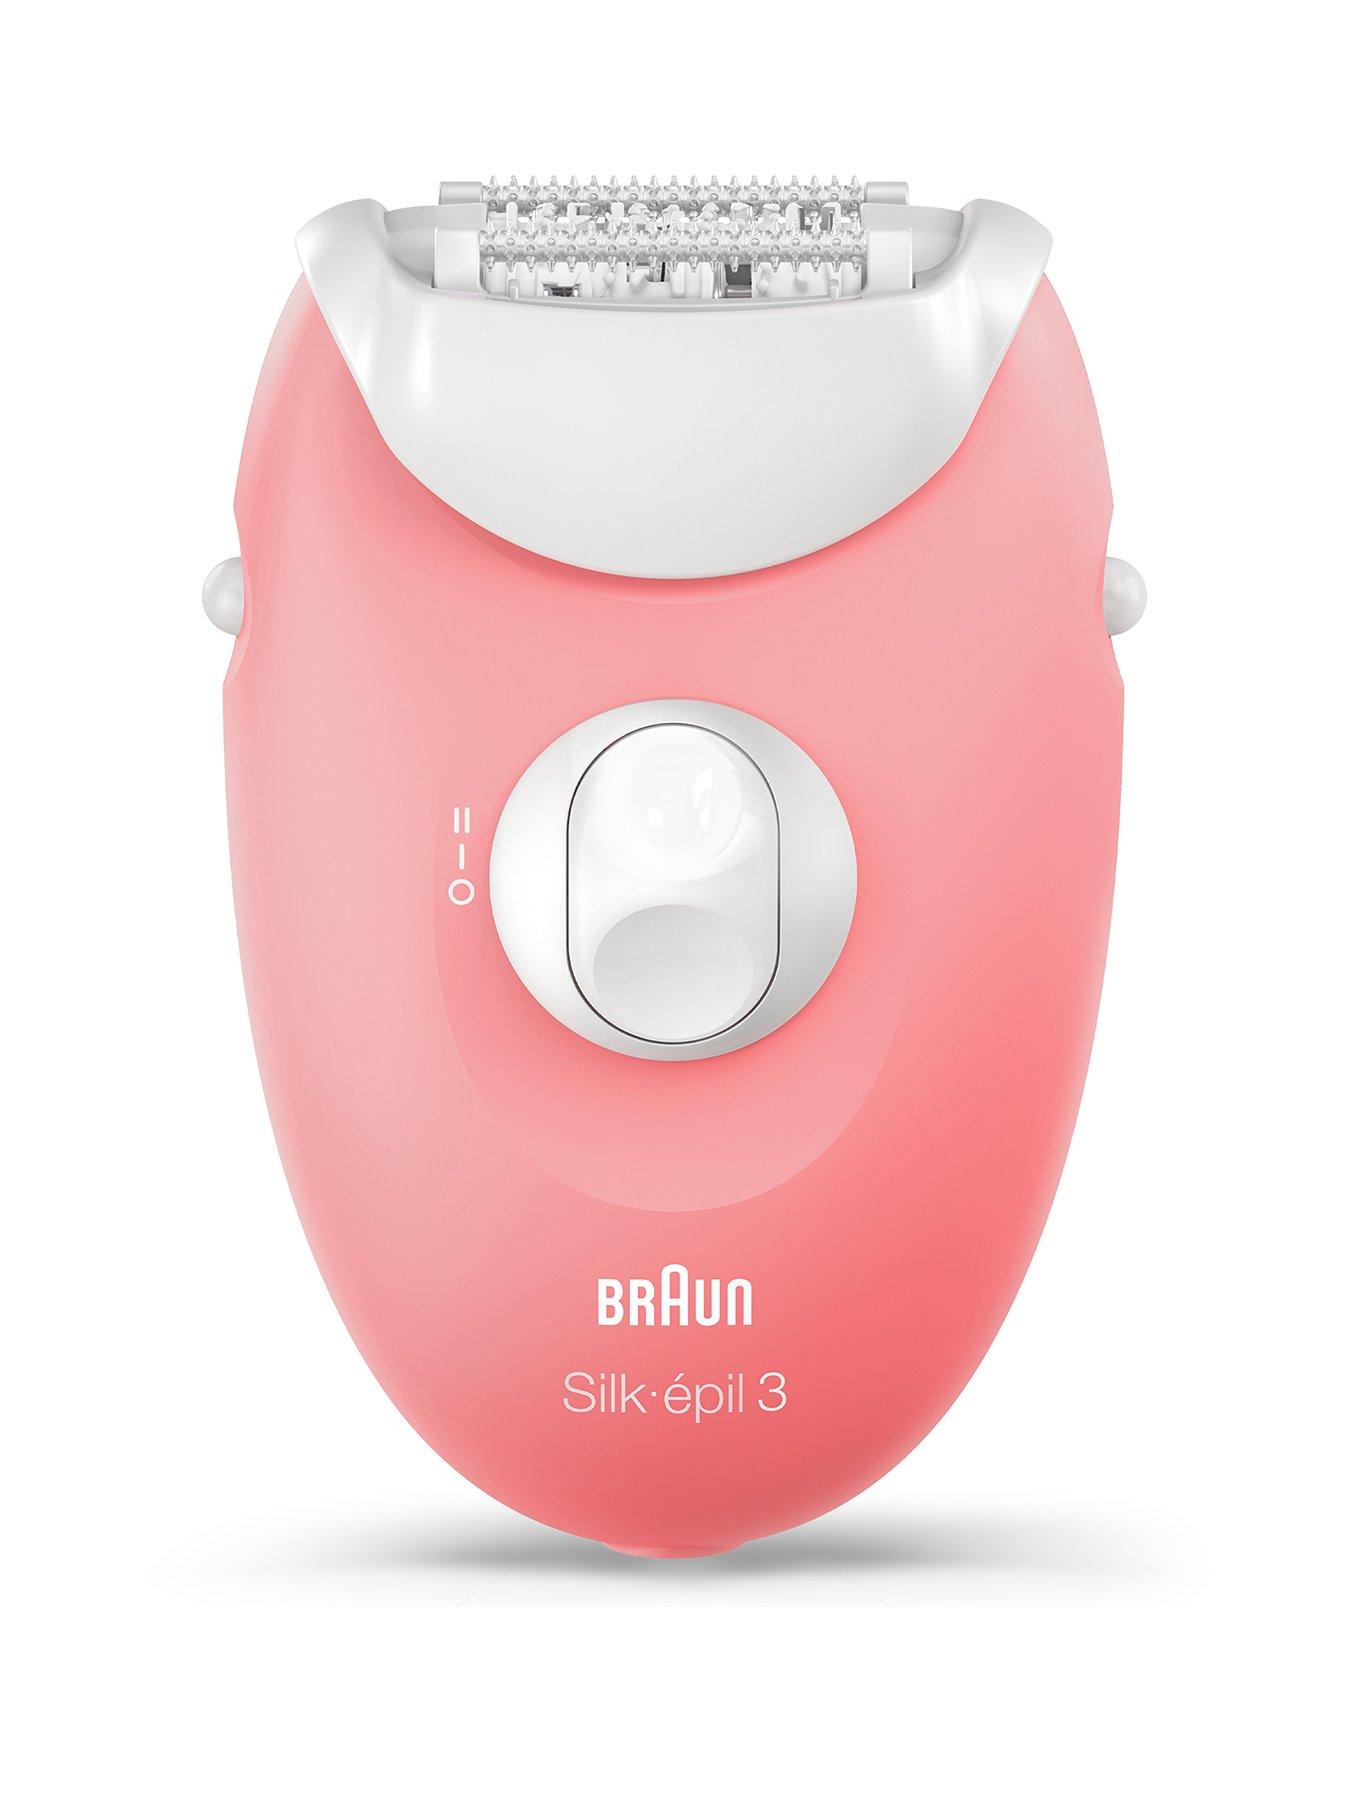 Braun Silk-épil 9 Epilator for Long-Lasting Hair Removal with Electric  Shaver & Trimmer, Bikini Trimmer & Exfoliator, 100% Waterproof, UK 2 Pin  Plug, 9-980, Rose Gold : : Beauty & Personal Care